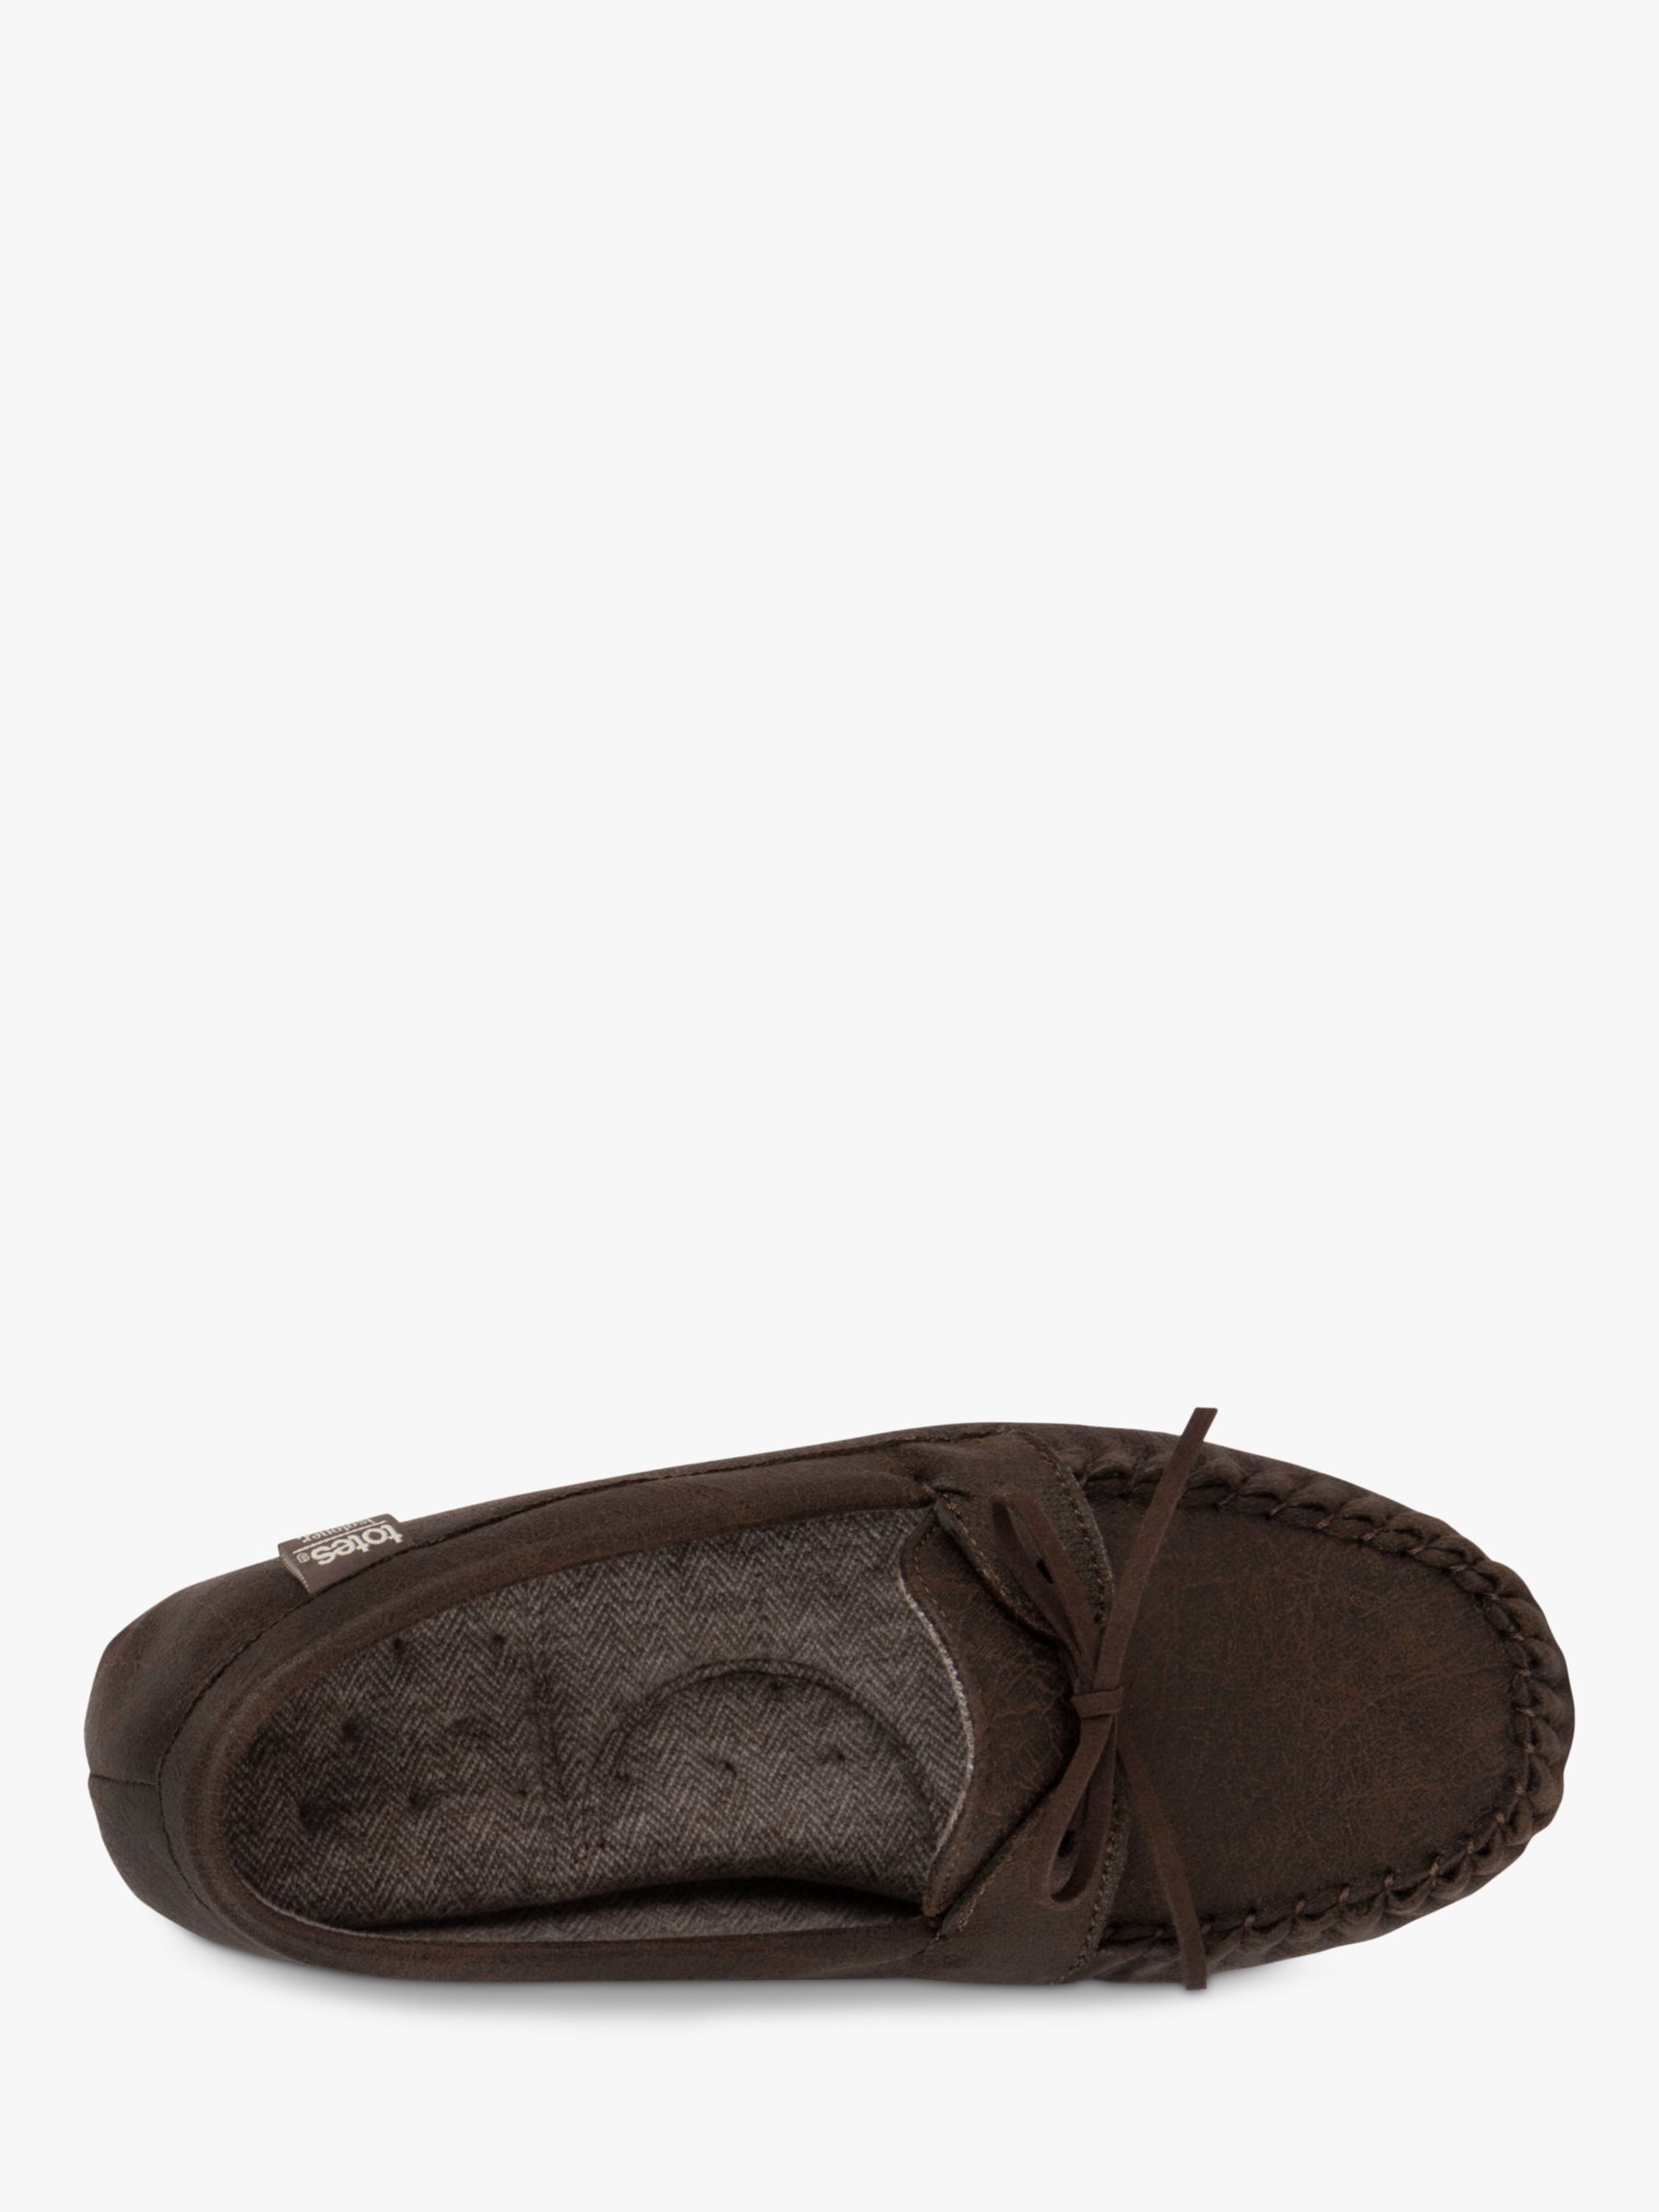 totes Distressed Moccasin Slippers, Brown, 8